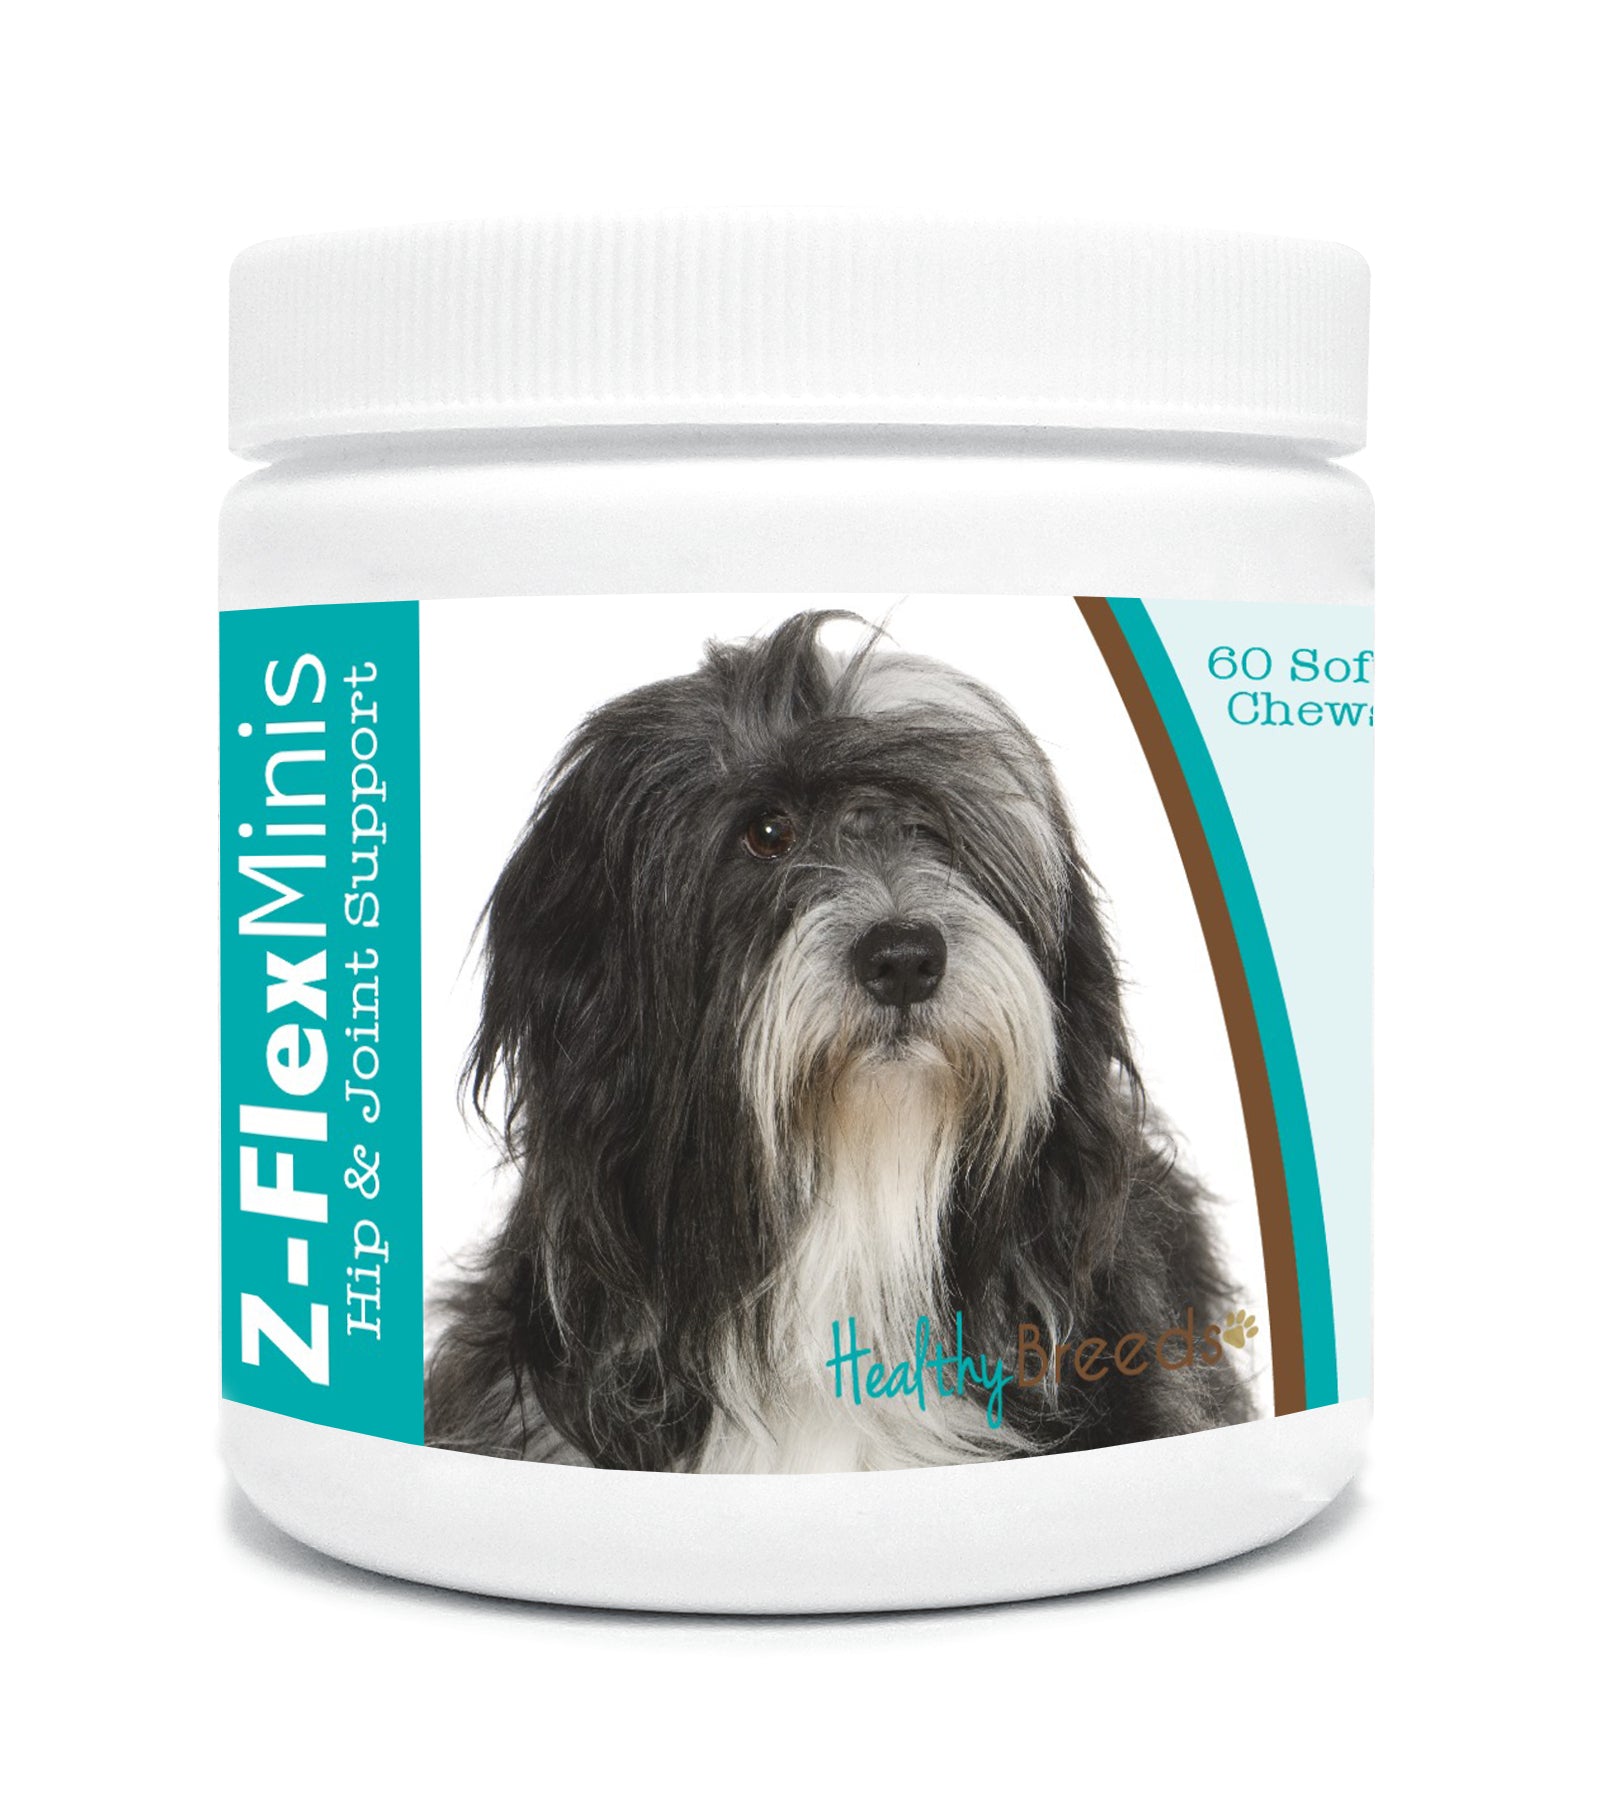 Lhasa Apso Z-Flex Minis Hip and Joint Support Soft Chews 60 Count